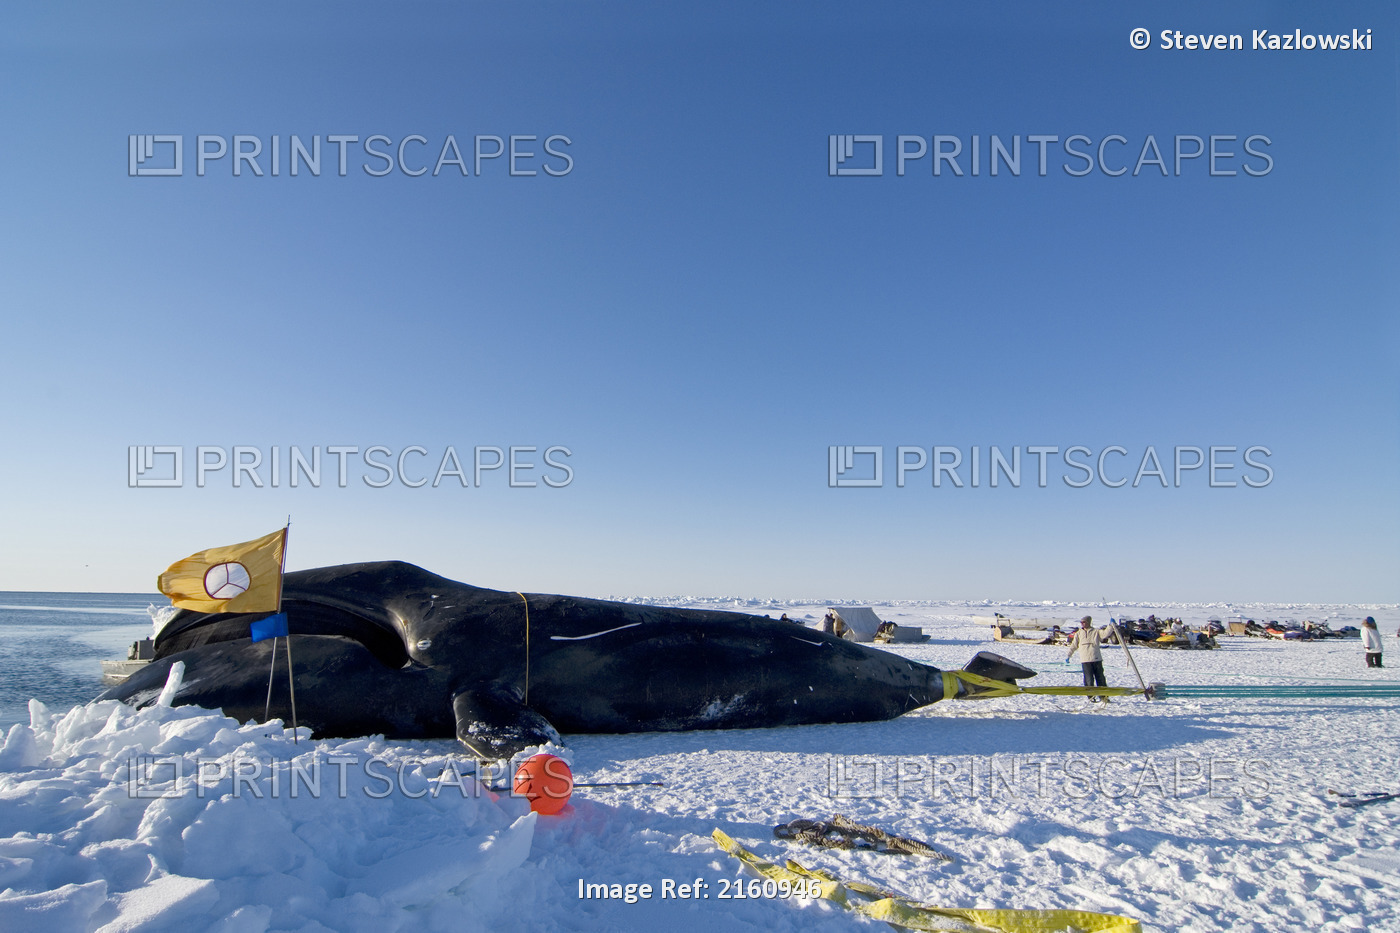 Residents Of The Inupiaq Village Of Barrow Pull Up A Bowhead Whale From The ...